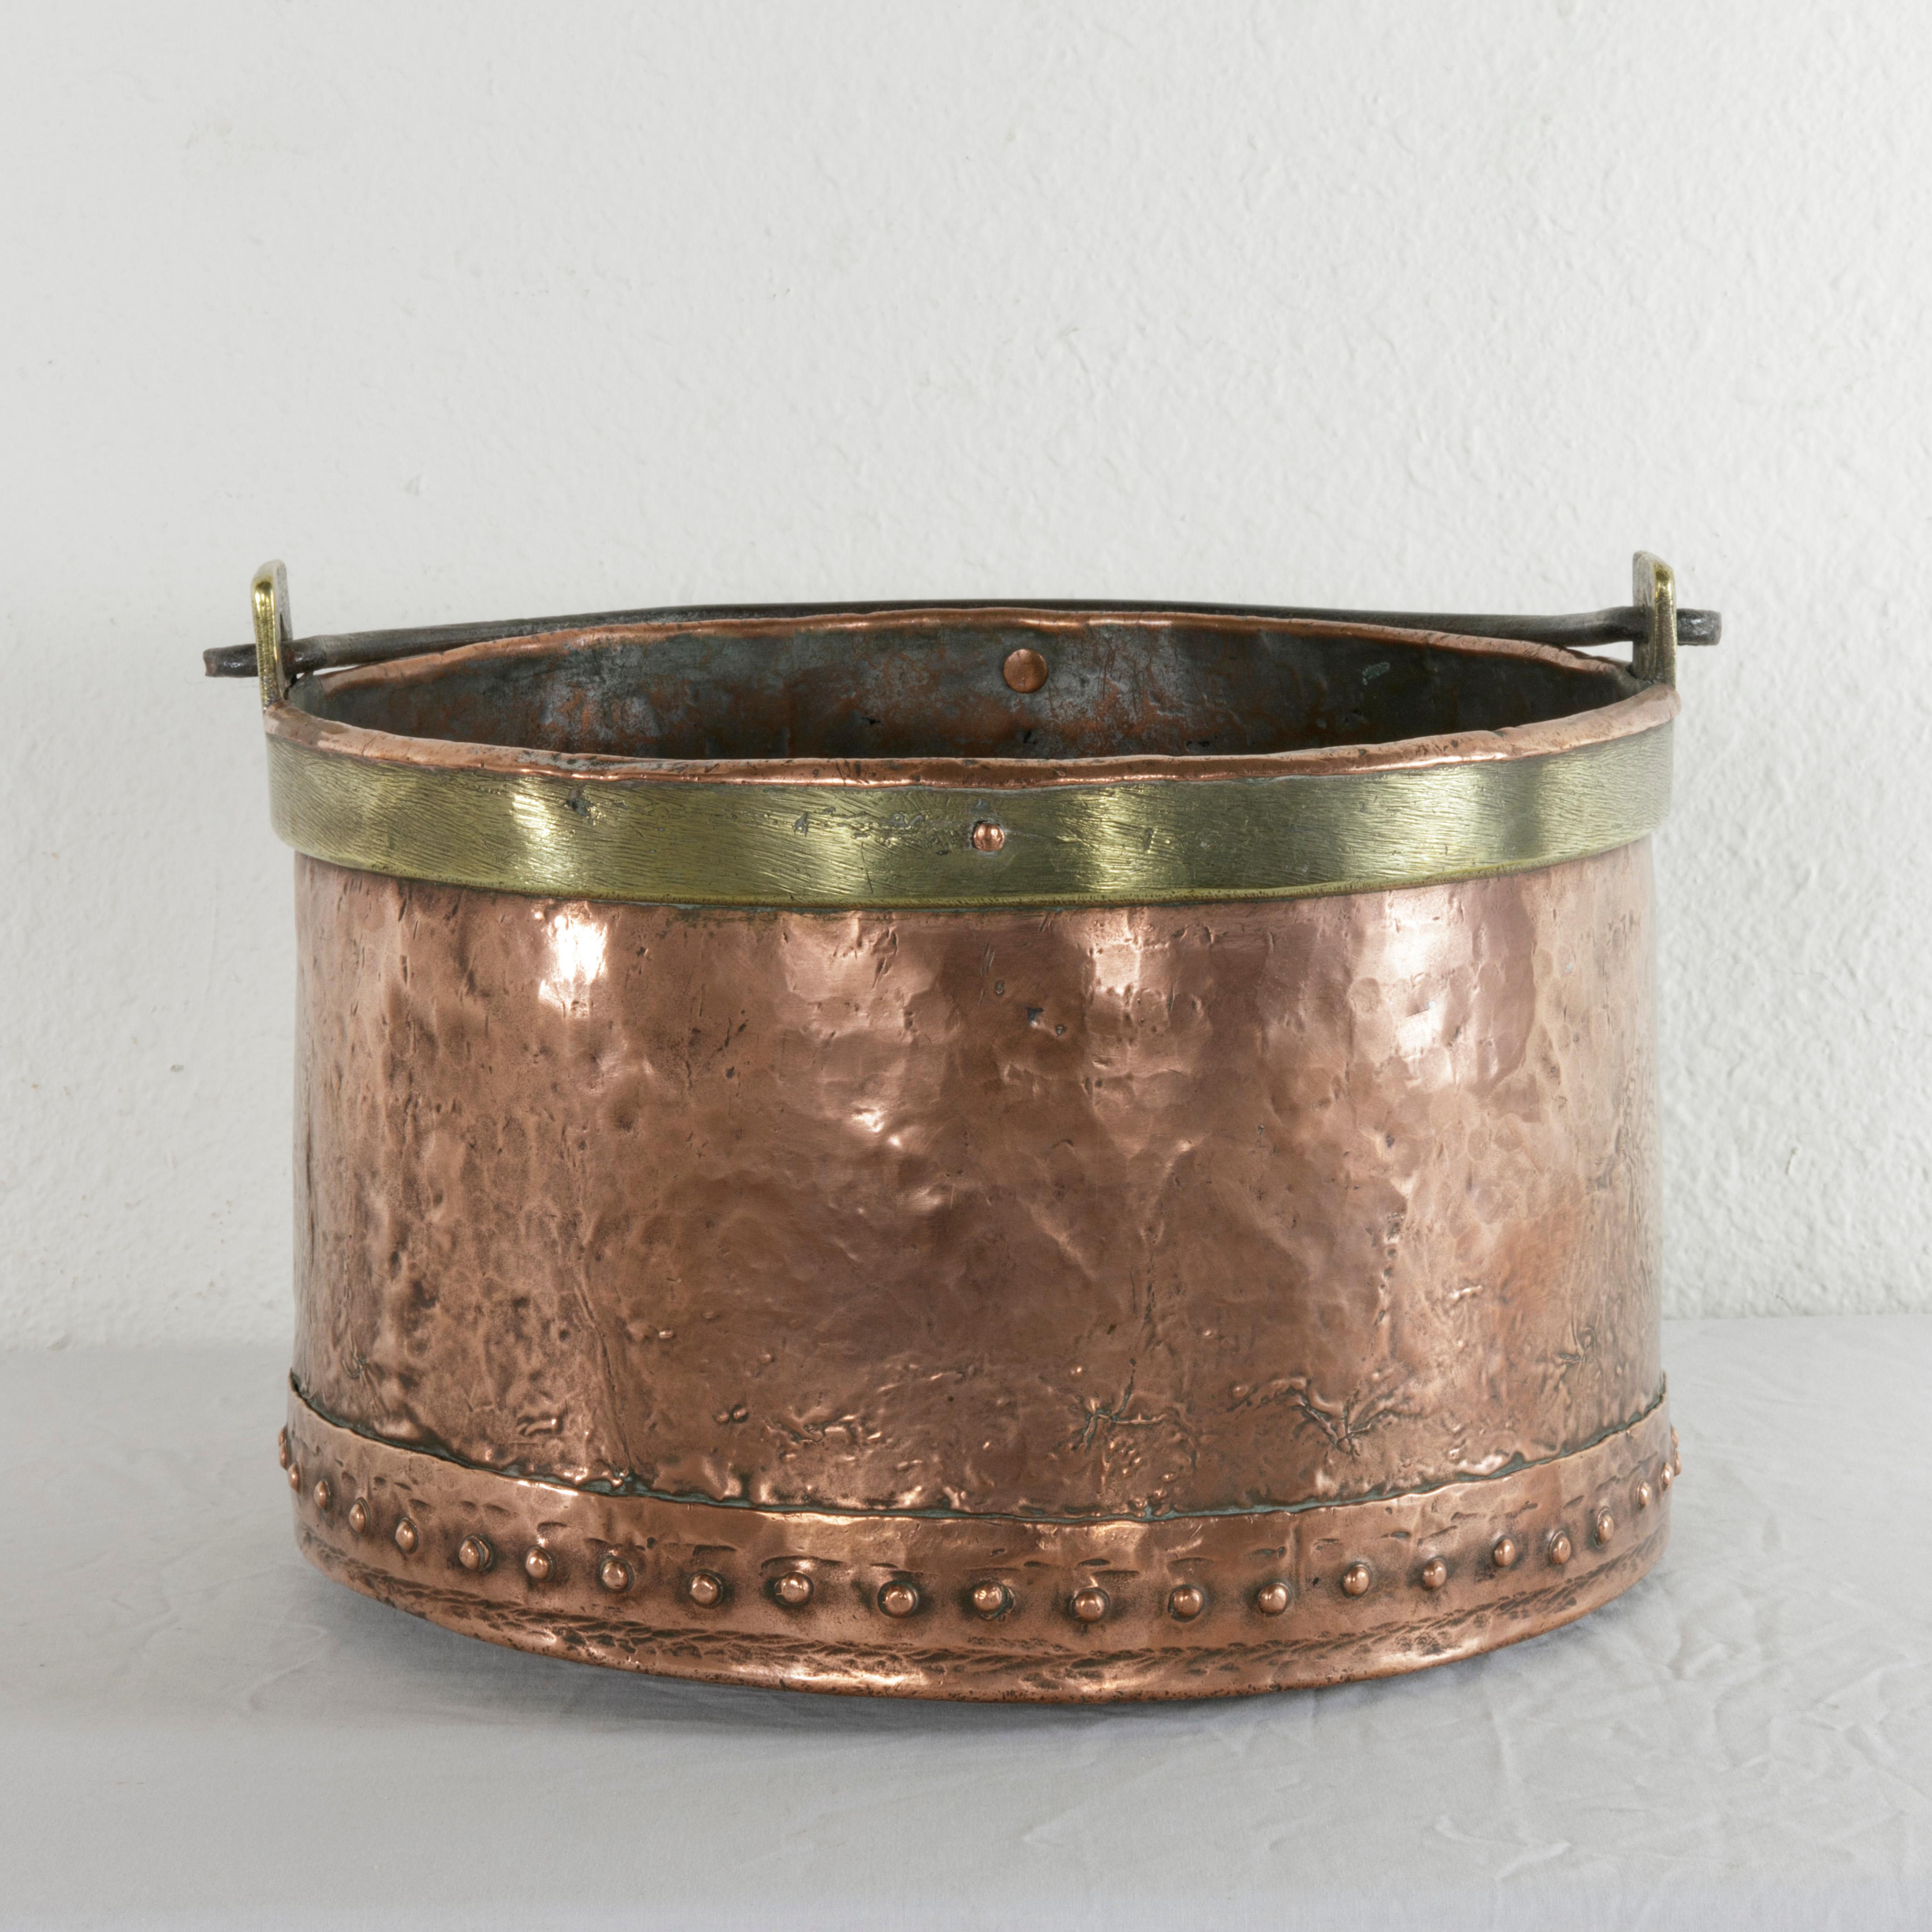 This large late 19th century copper cauldron features brass banding around the top and a hand-forged iron handle. The hand-hammered facade of the piece is joined to the bottom with copper rivets, adding to its aesthetic appeal. Ideal as a planter or